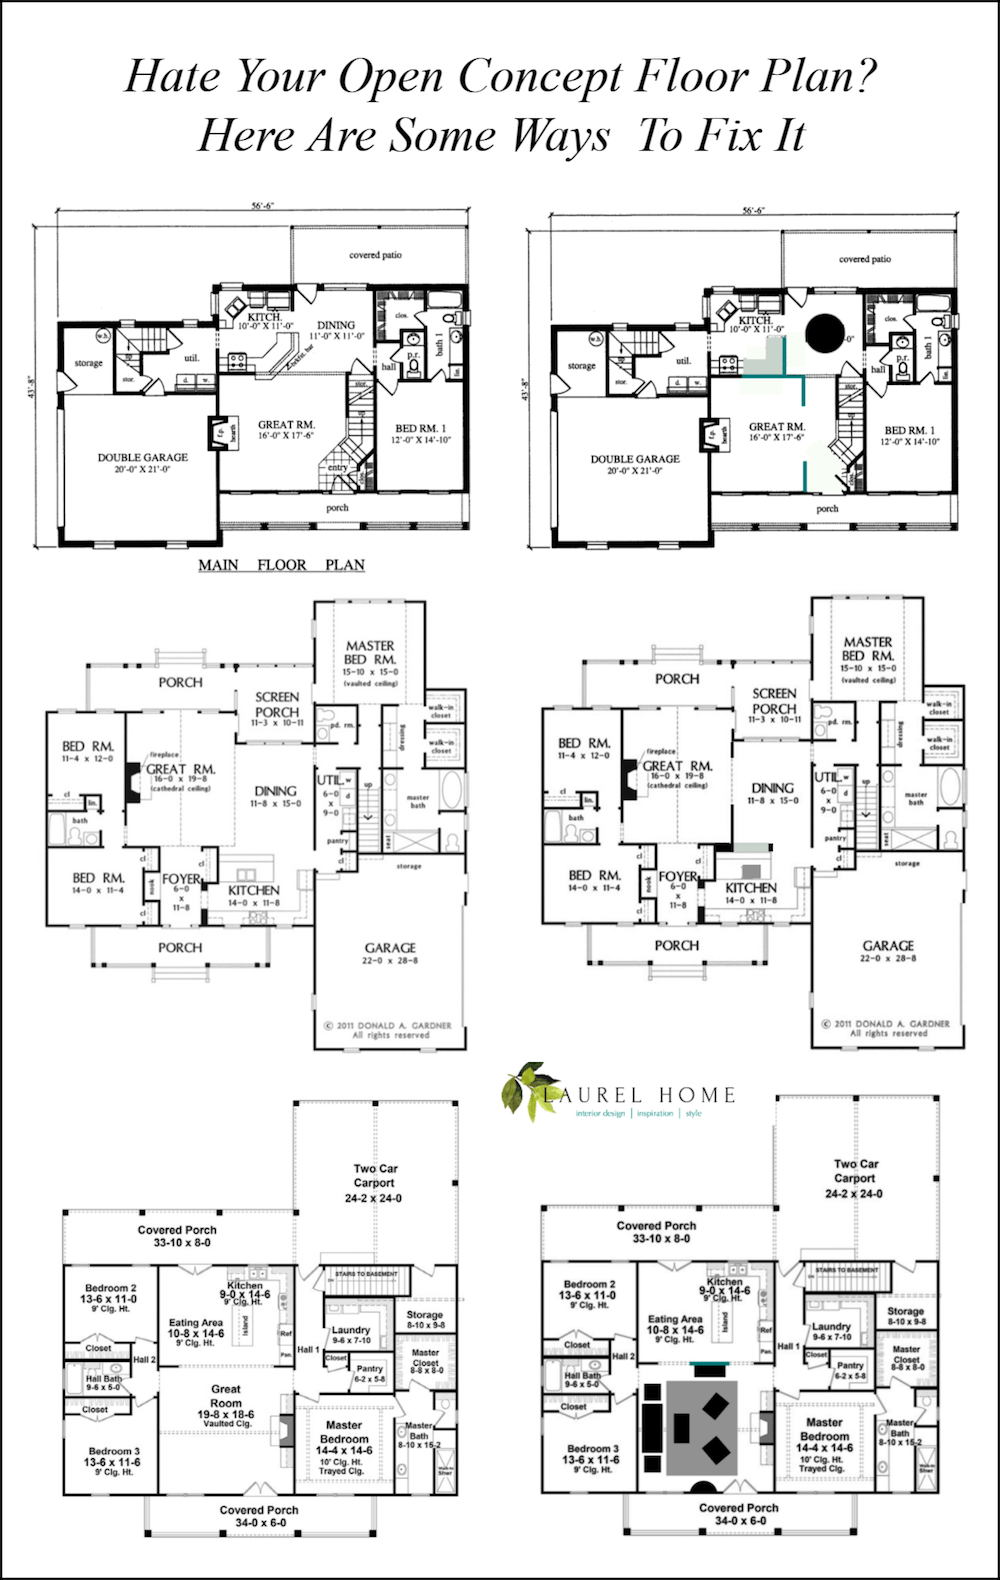 open concept floor plans and how to fix